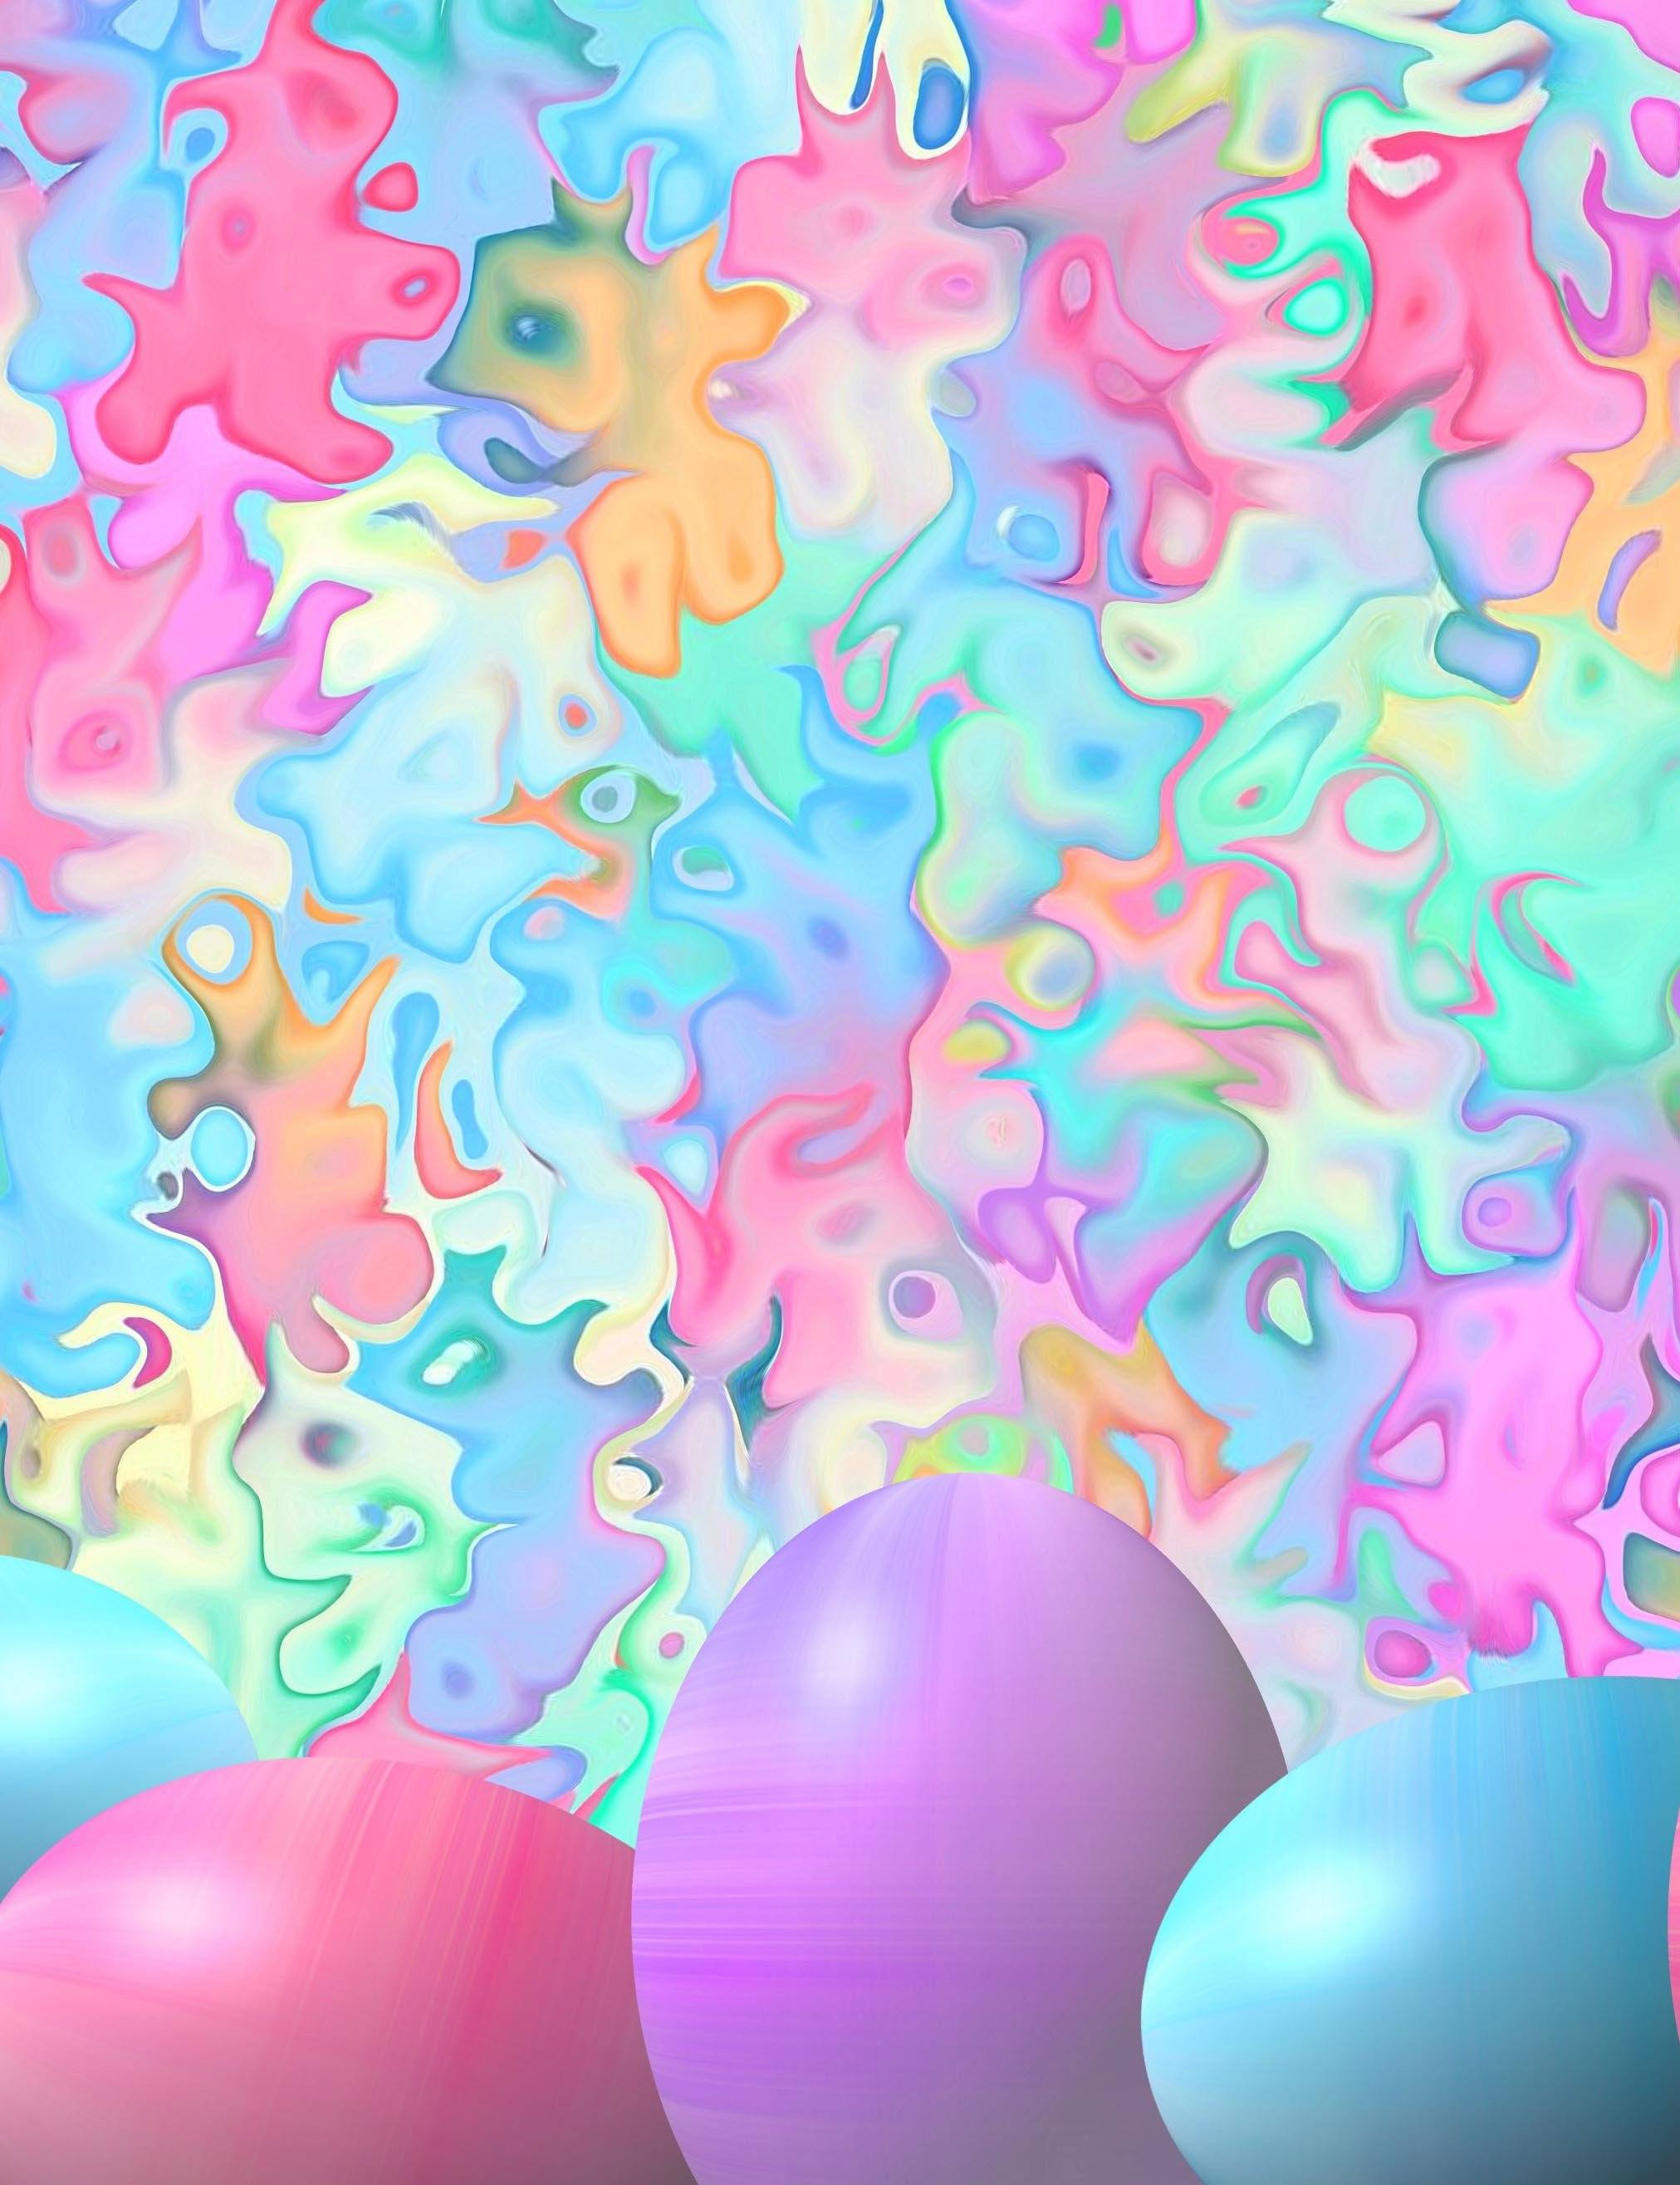 Colorful Easter Eggs With Abstract Watercolor Background Backdrop Shopbackdrop